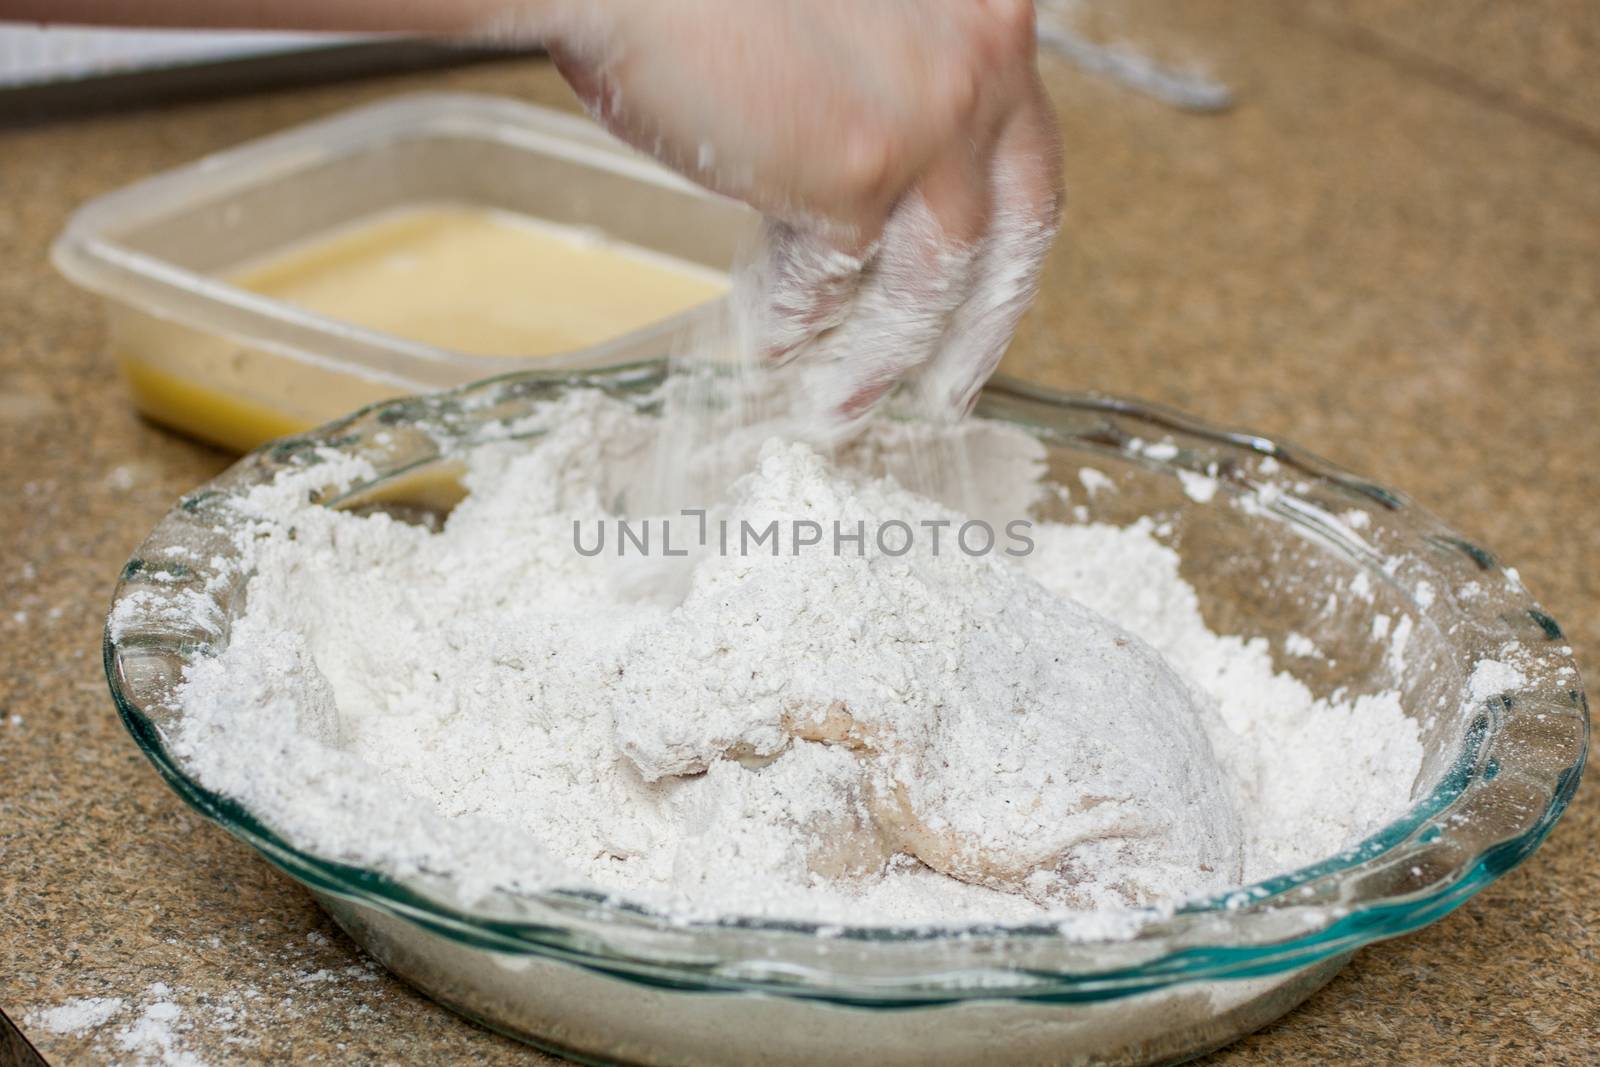 A woman coats fresh chicken in flour and egg wash in preperation for frying.